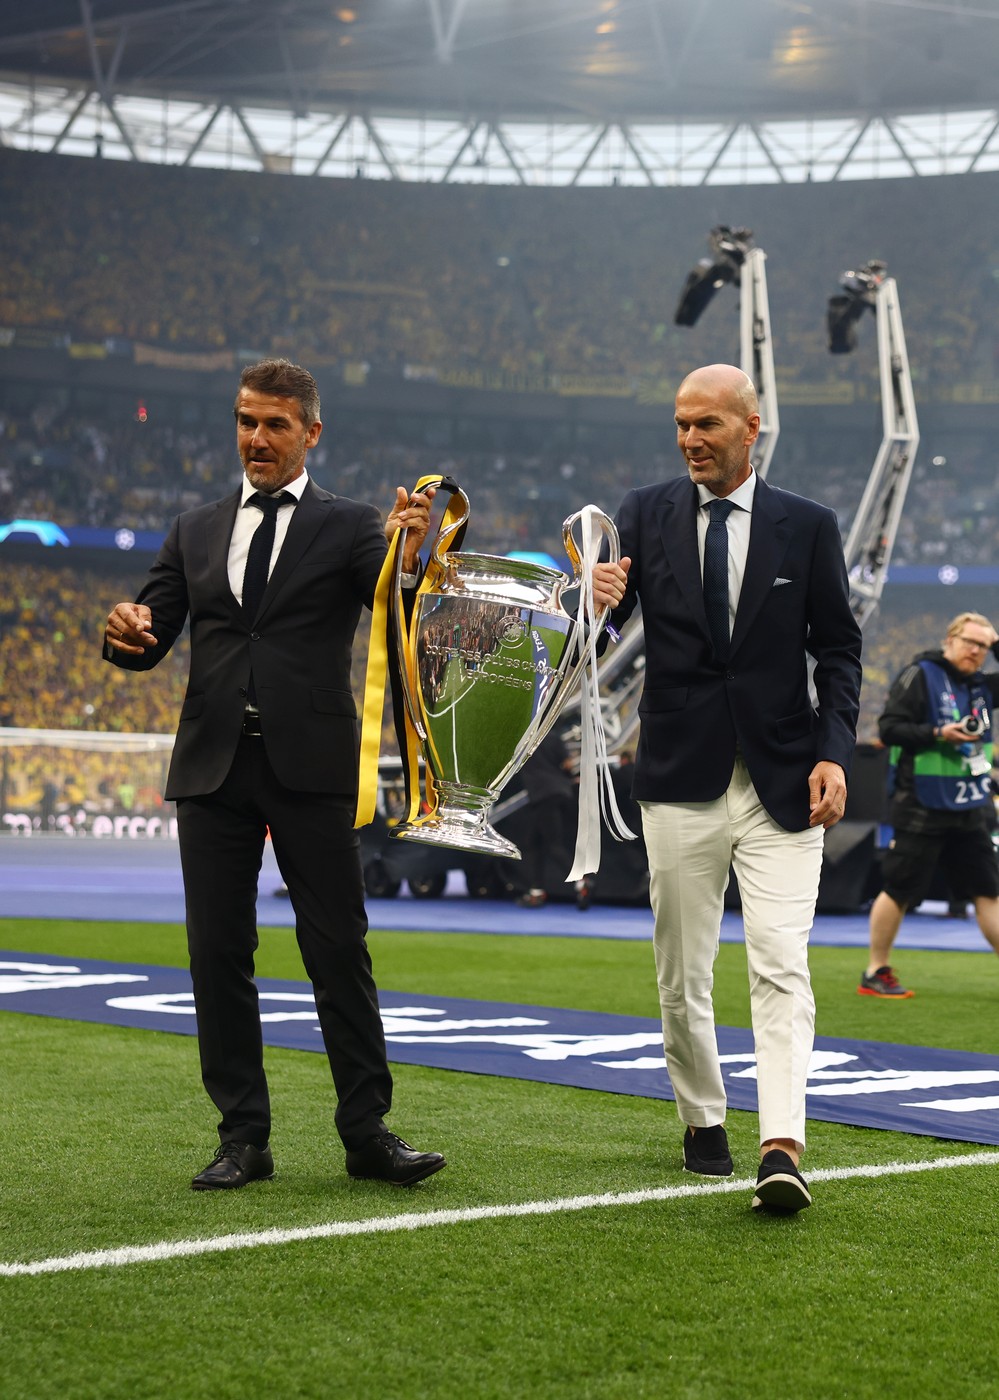 June 1, 2024, London: London, England, 1st June 2024. Karl-Heinz Riedle and Zinedine Zidane present the UEFA Champions League Trophy prior to the UEFA Champions League final match at Wembley Stadium, London.,Image: 878175567, License: Rights-managed, Restrictions: * United Kingdom Rights OUT *, Model Release: no